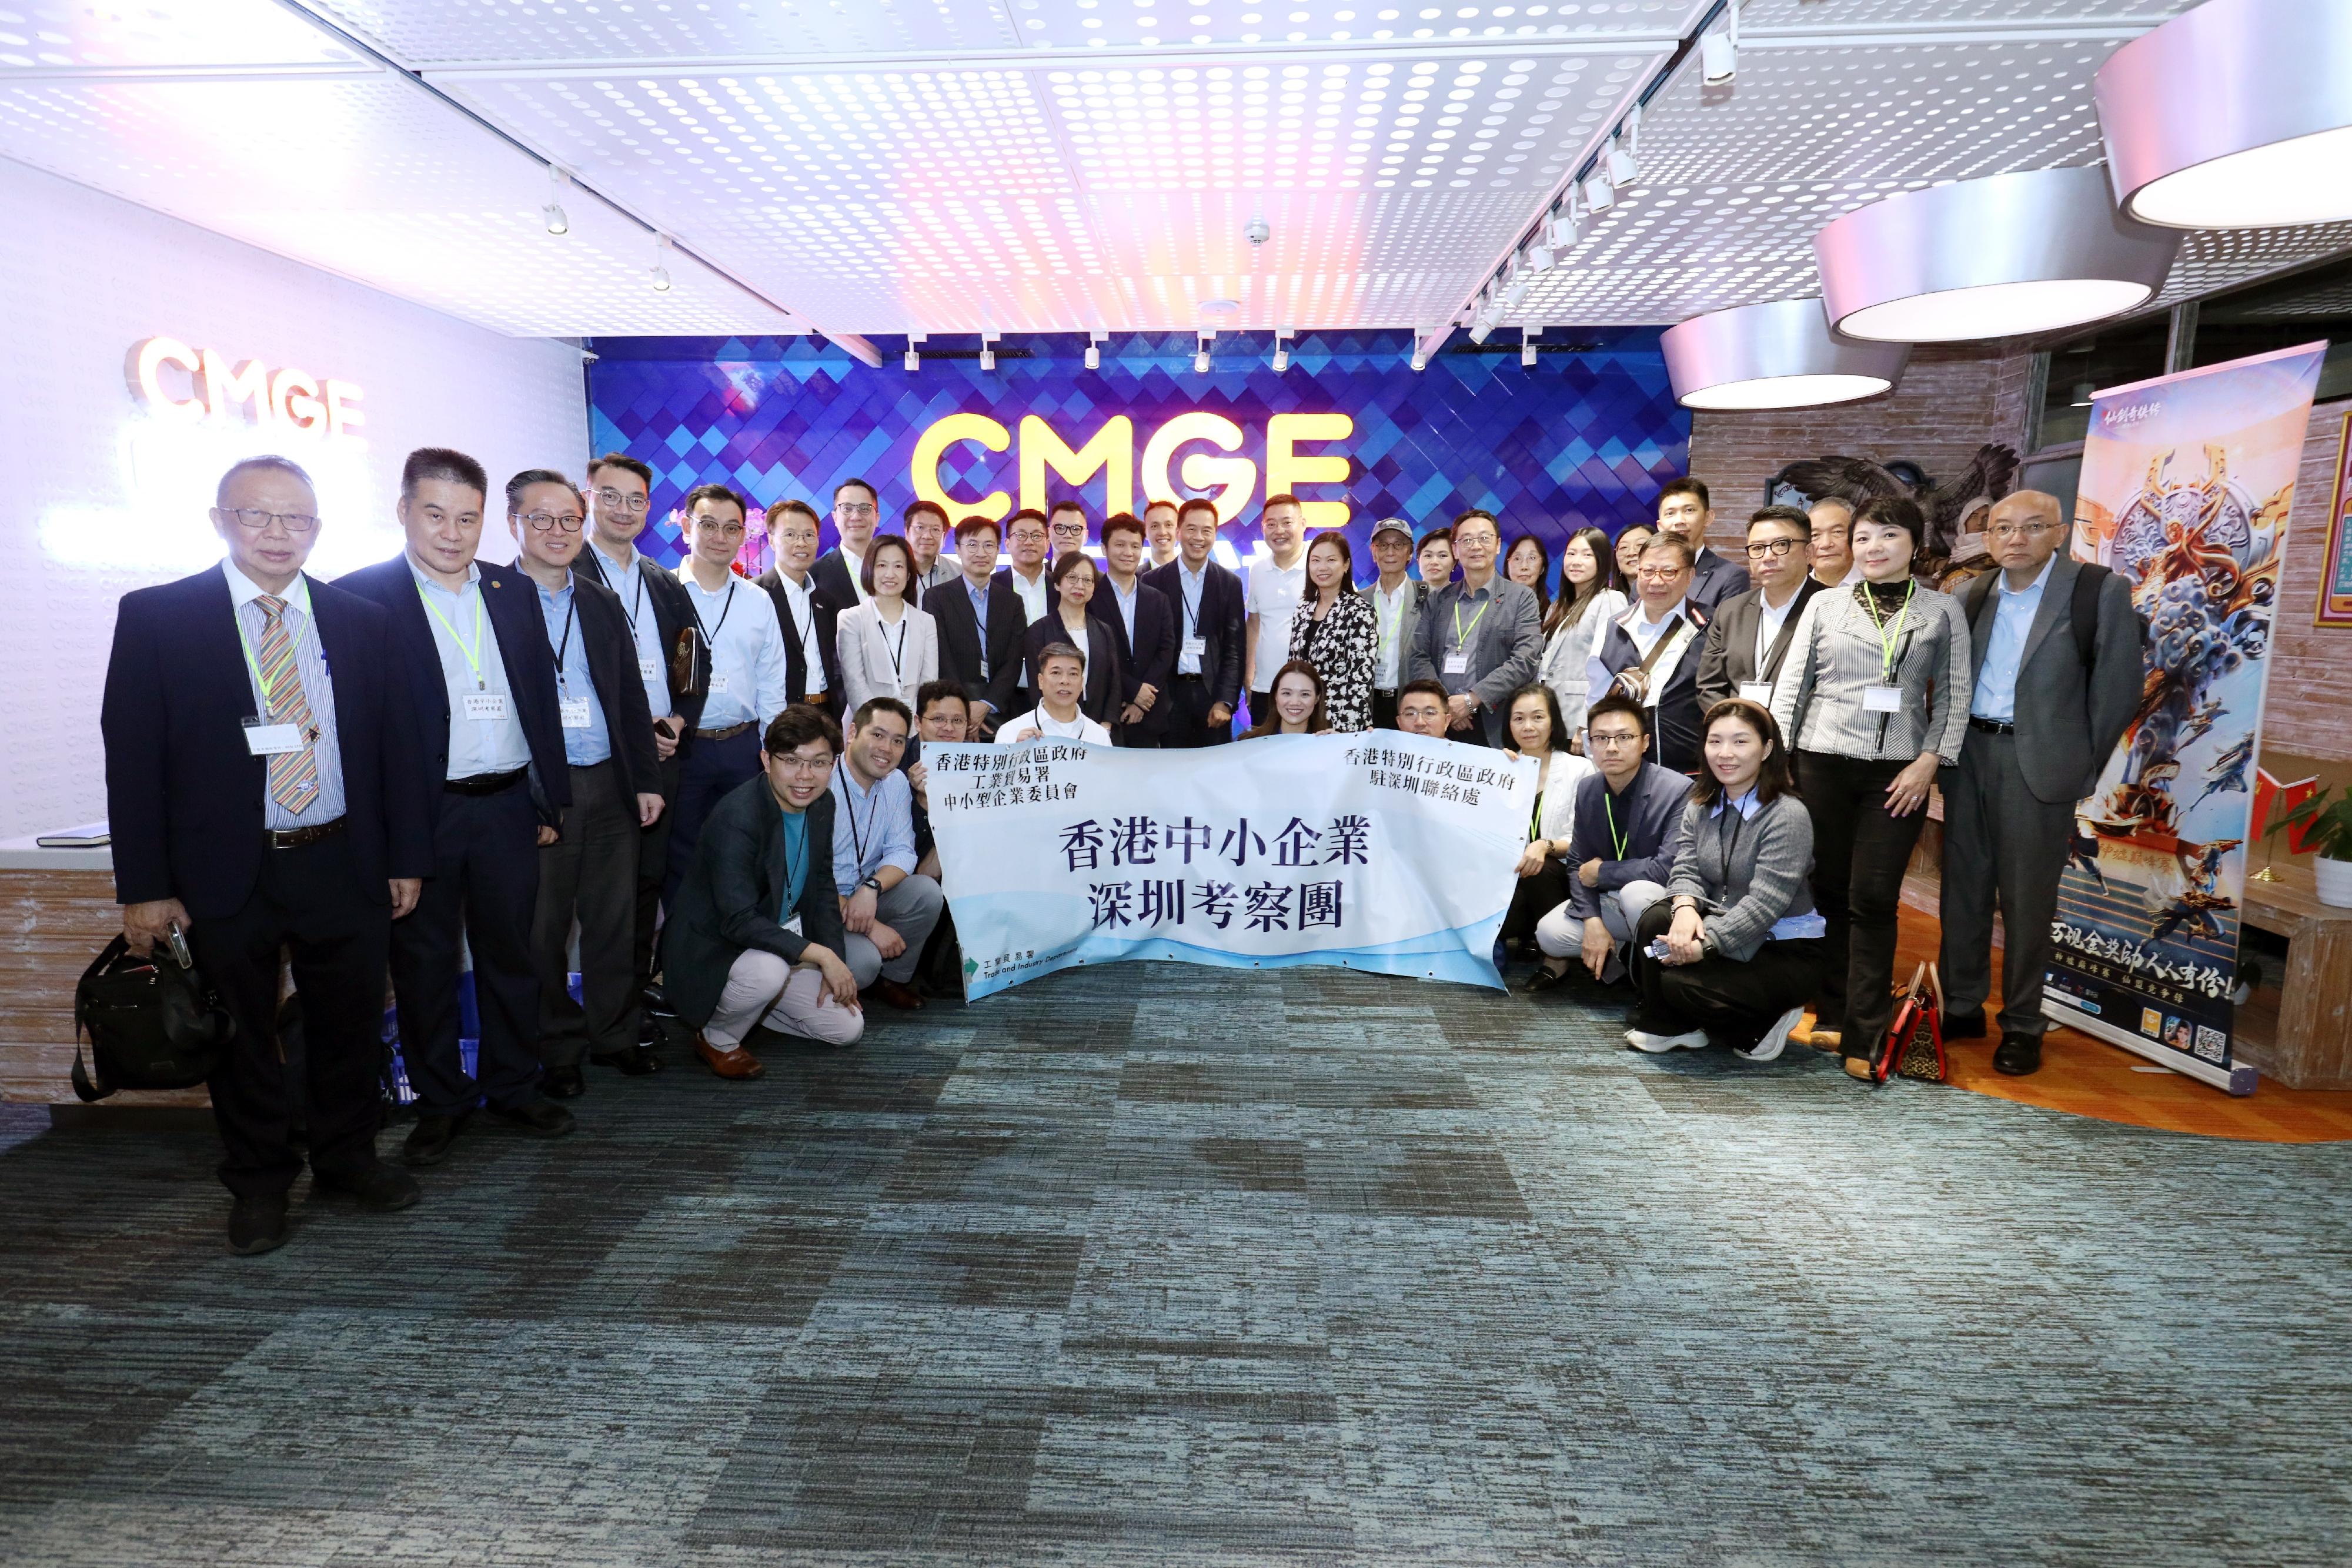 The Trade and Industry Department, the Small and Medium Enterprises Committee and the Shenzhen Liaison Unit of the Hong Kong Special Administrative Region Government led a Hong Kong small and medium enterprises  delegation to Shenzhen today (November 1). The delegation visited CMGE Technology Group Limited.
